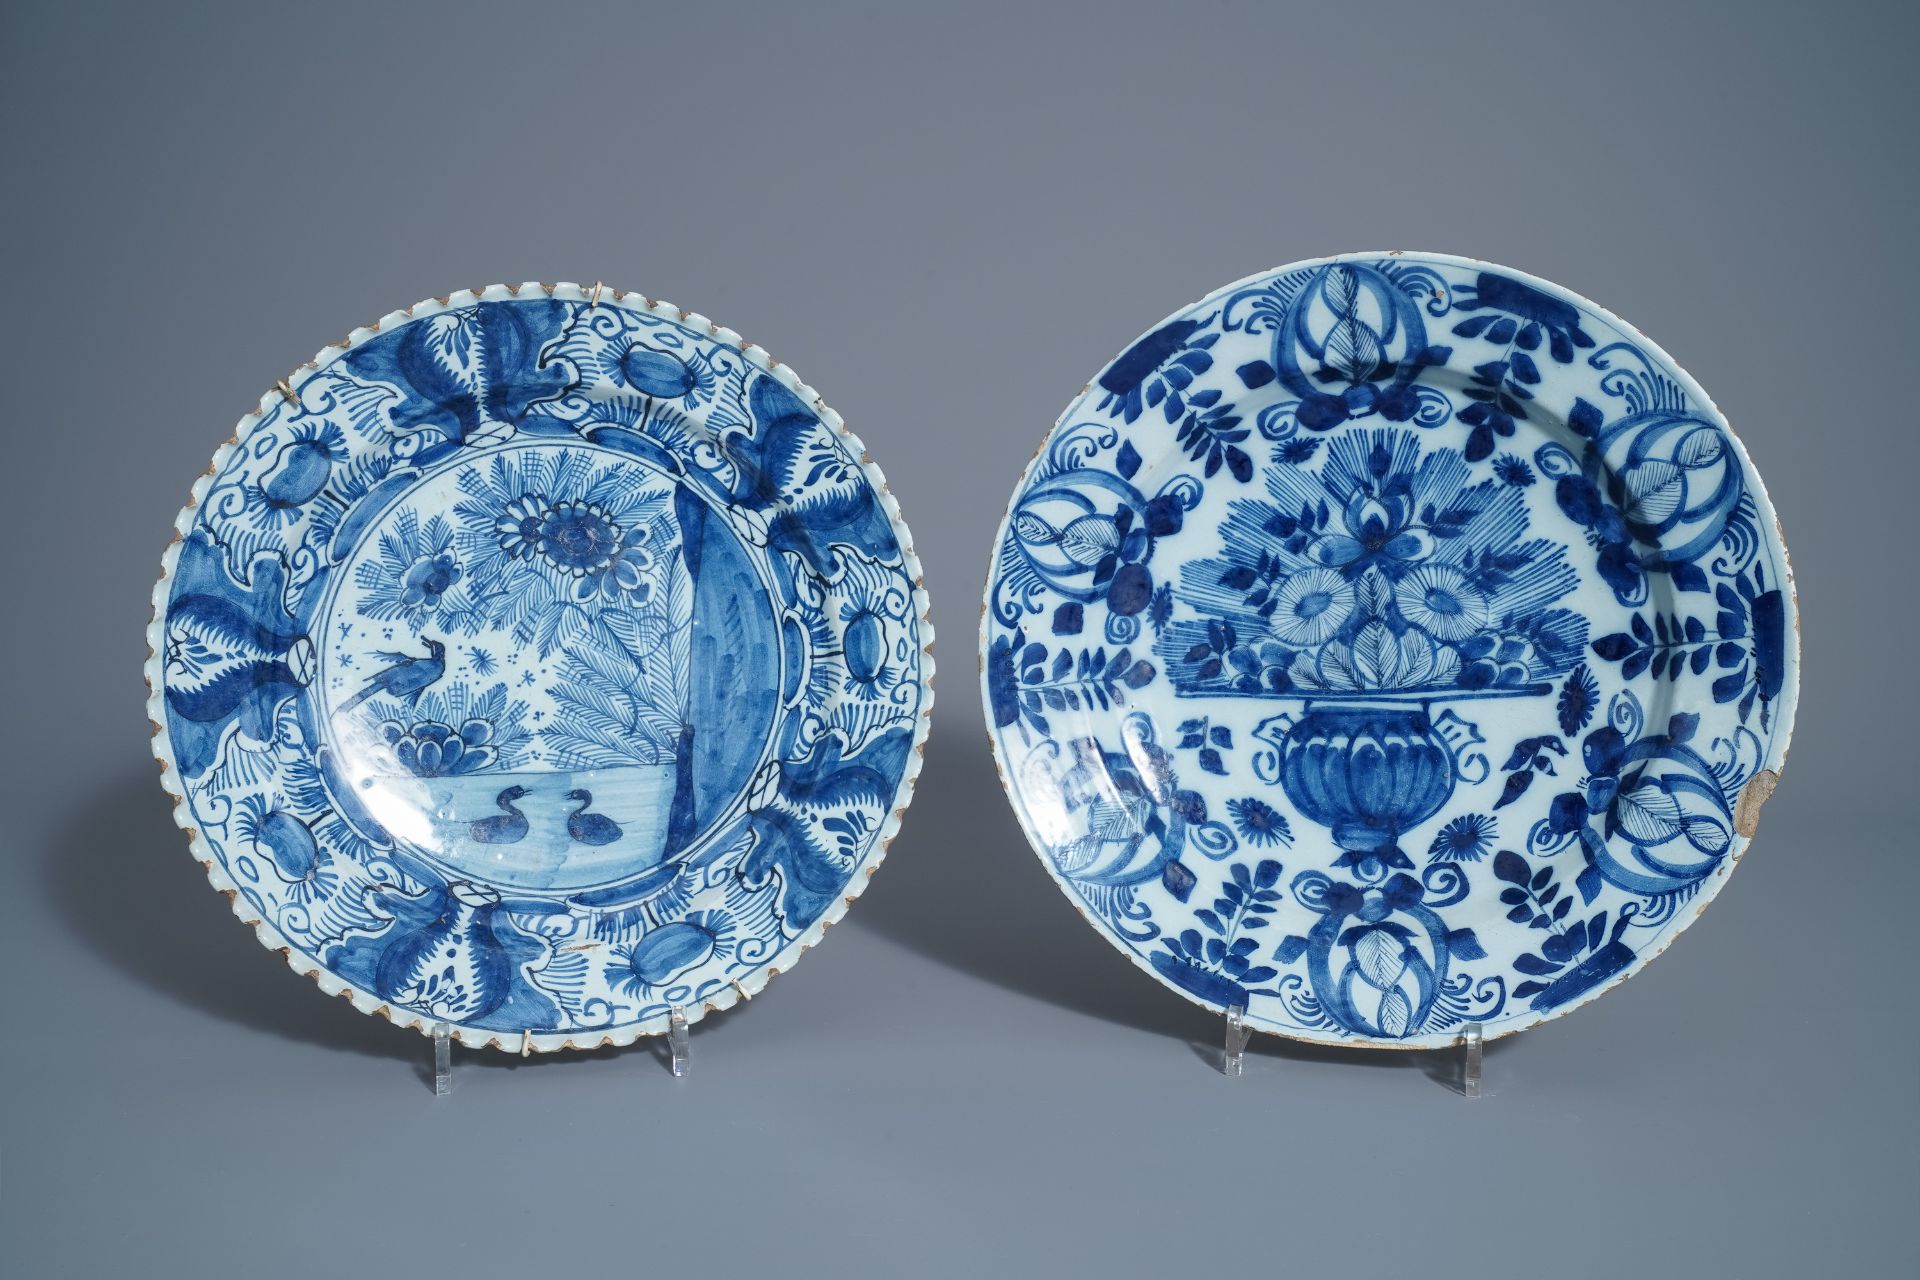 Twelve polychrome and blue and white Dutch Delft plates and an oval tray, 18th C. - Image 4 of 13